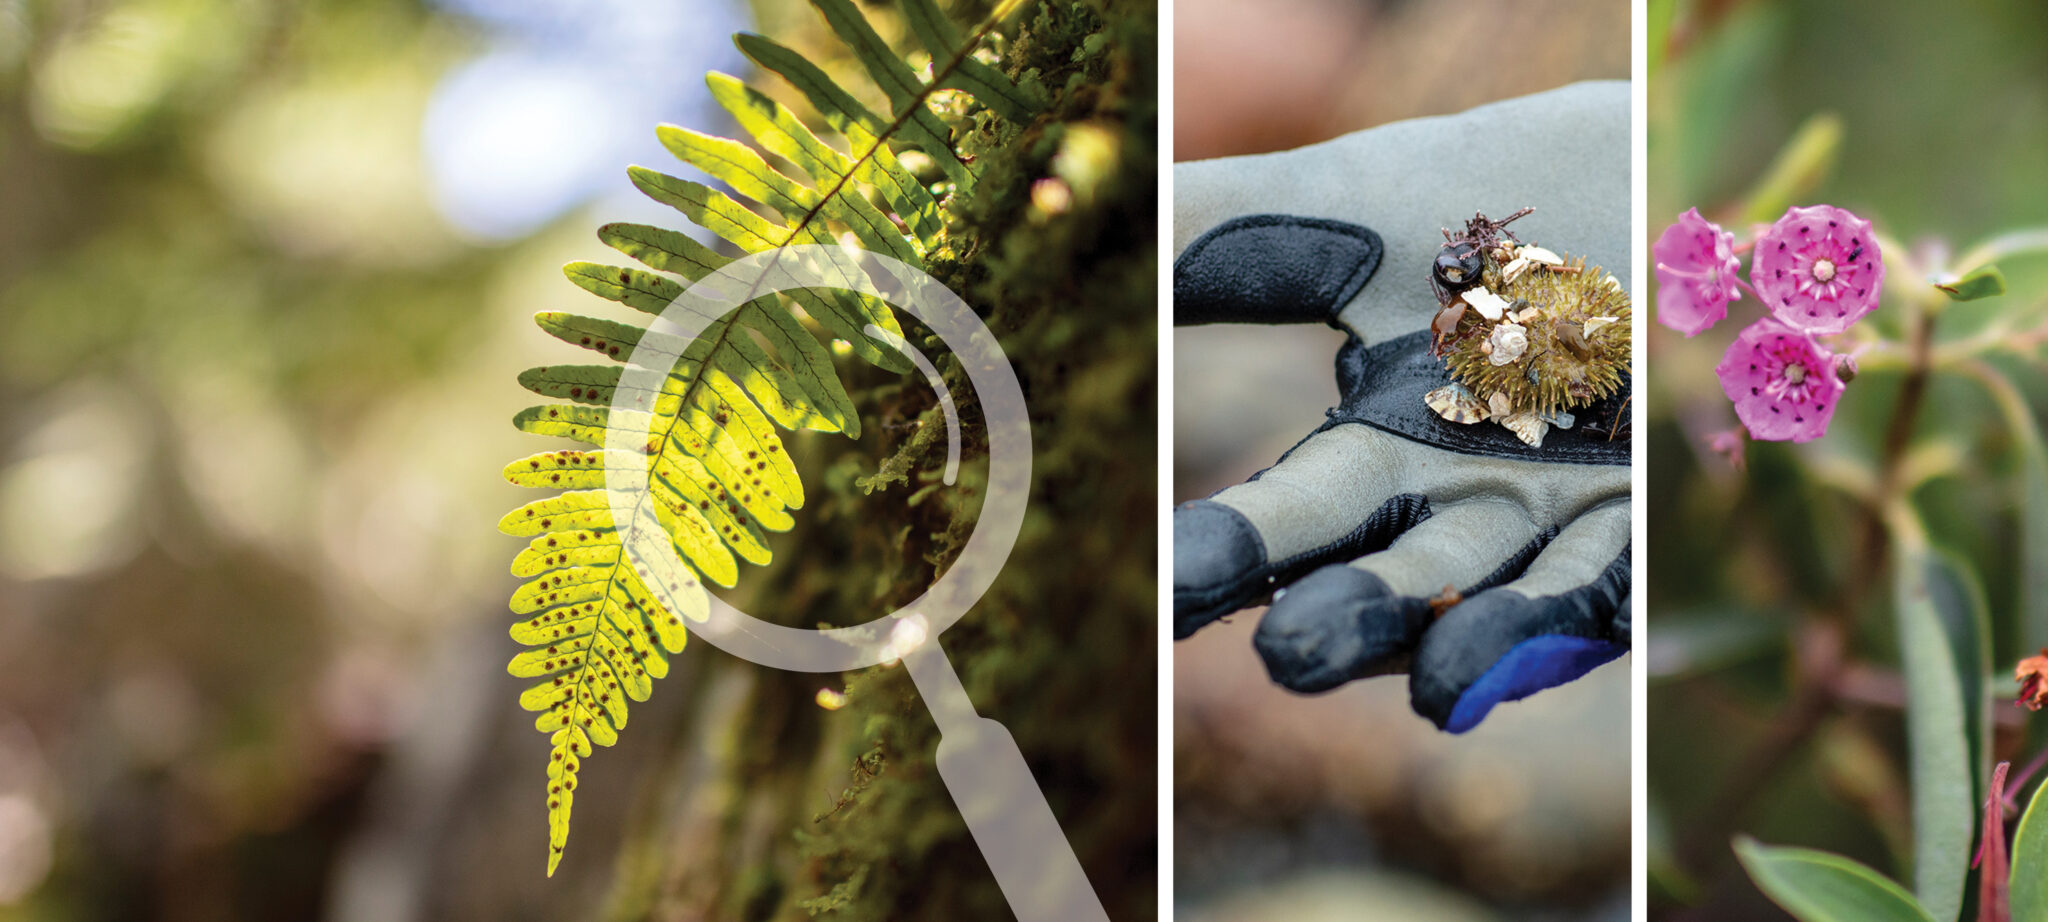 Magnifying glass over forest plants and hand holding sea urchin